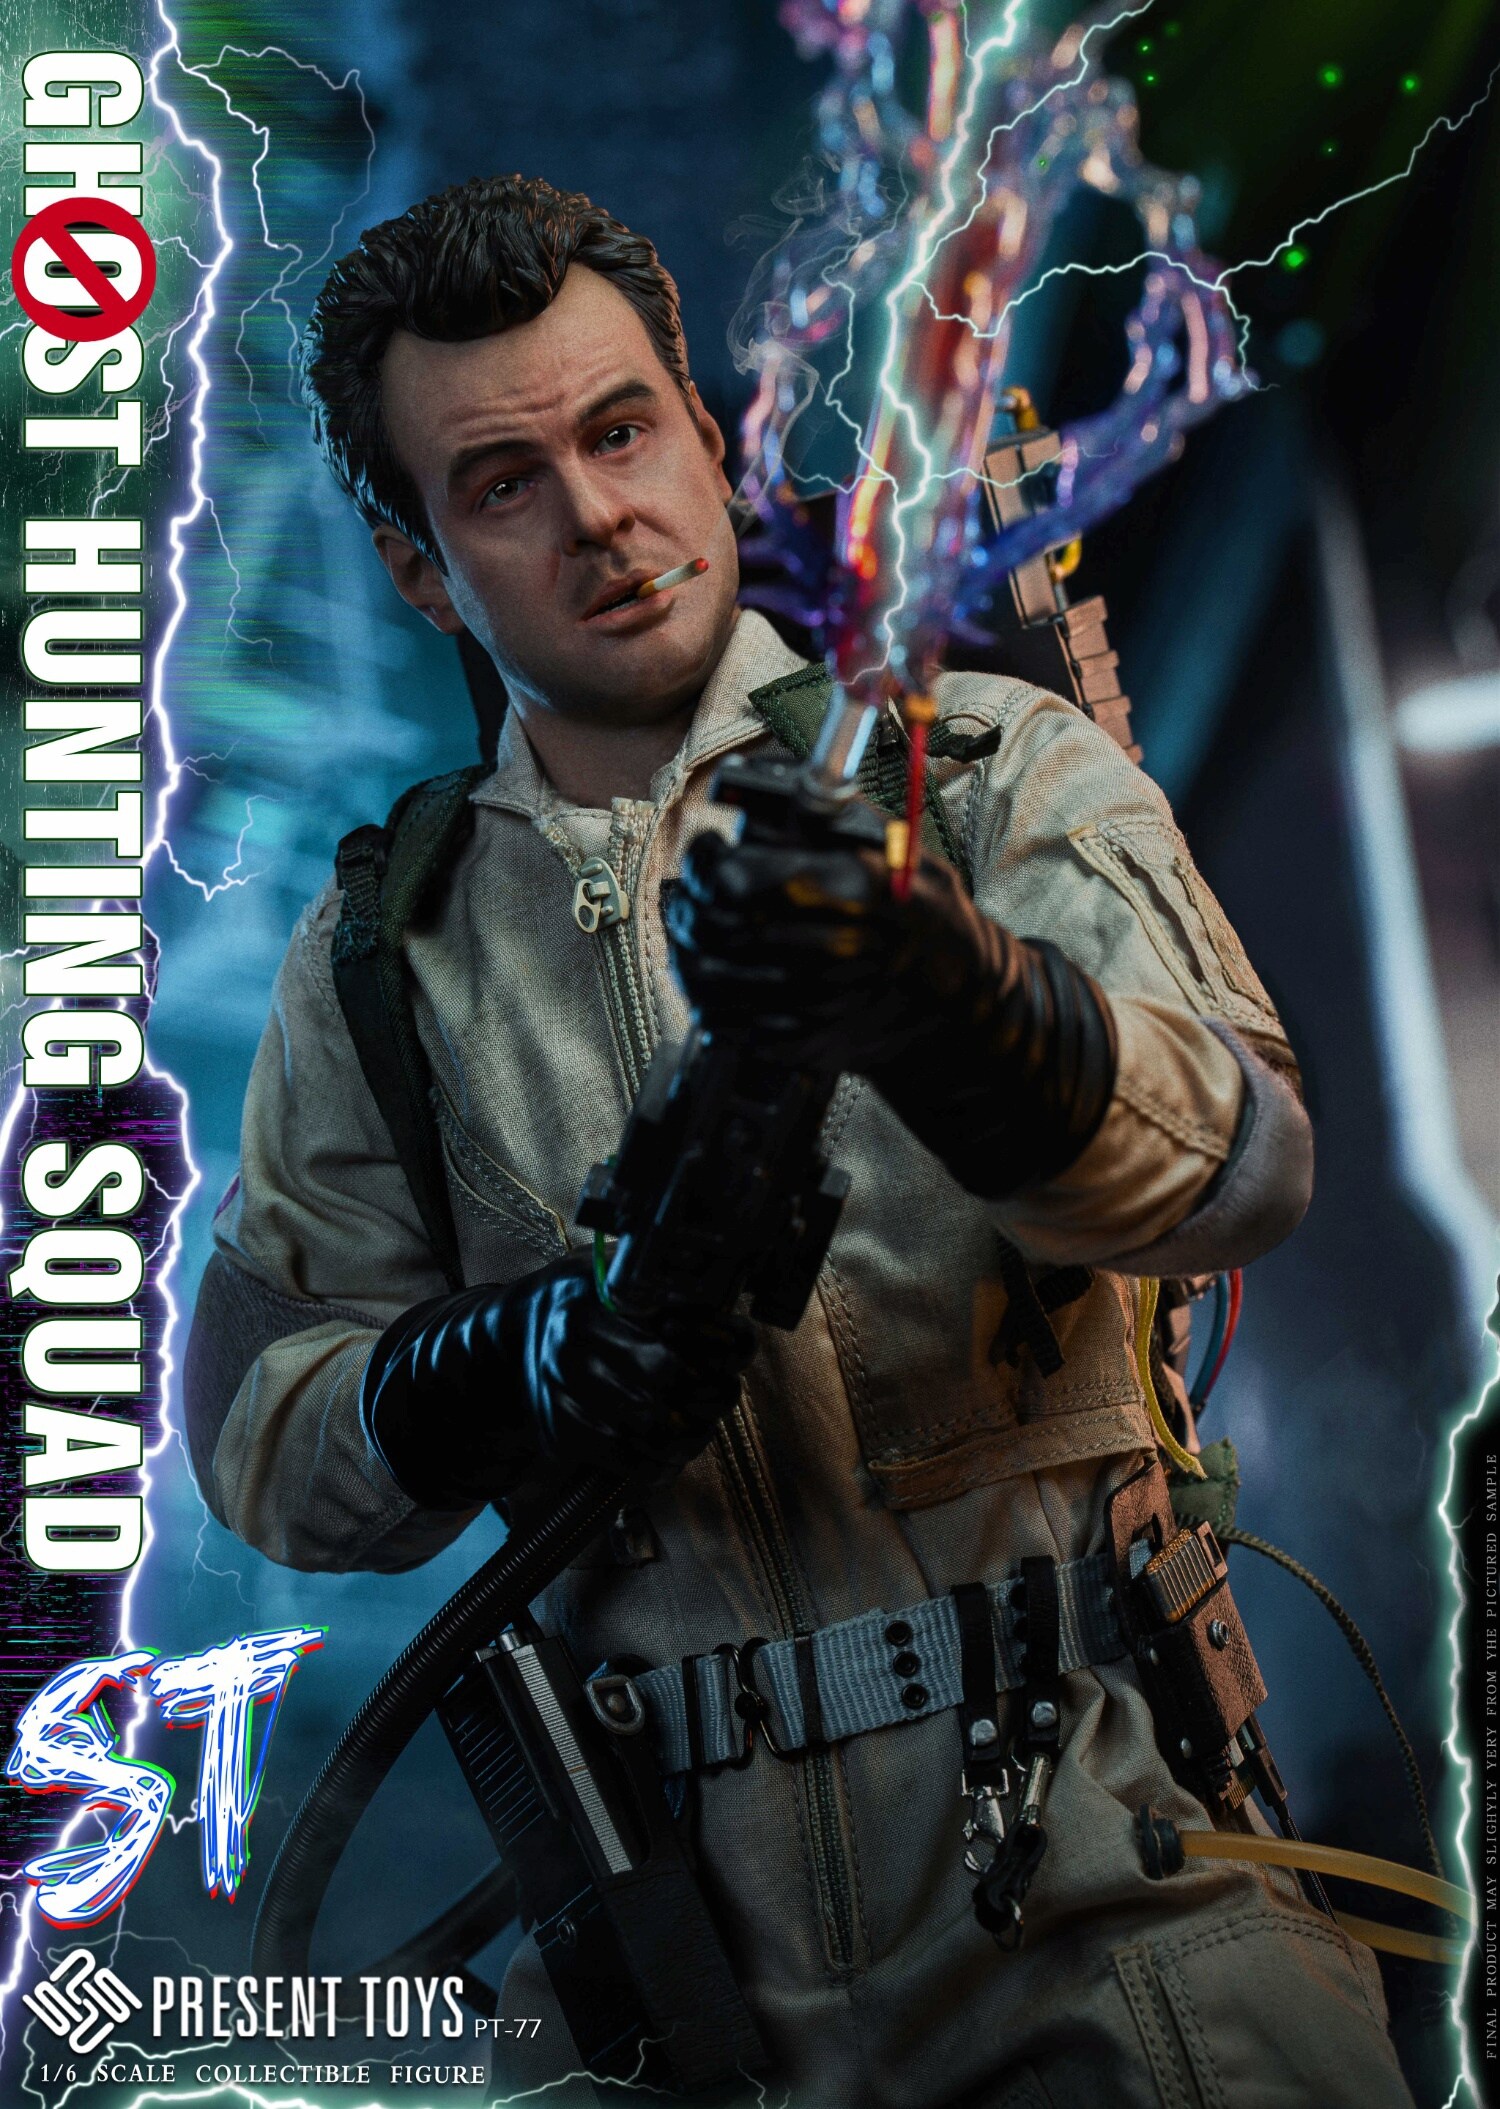 PRESENTTOYS - NEW PRODUCT: PRESENT TOYS - Ghostbusters-ST Agent & SP Agent Collection #PT-sp77/PT-sp78 03180